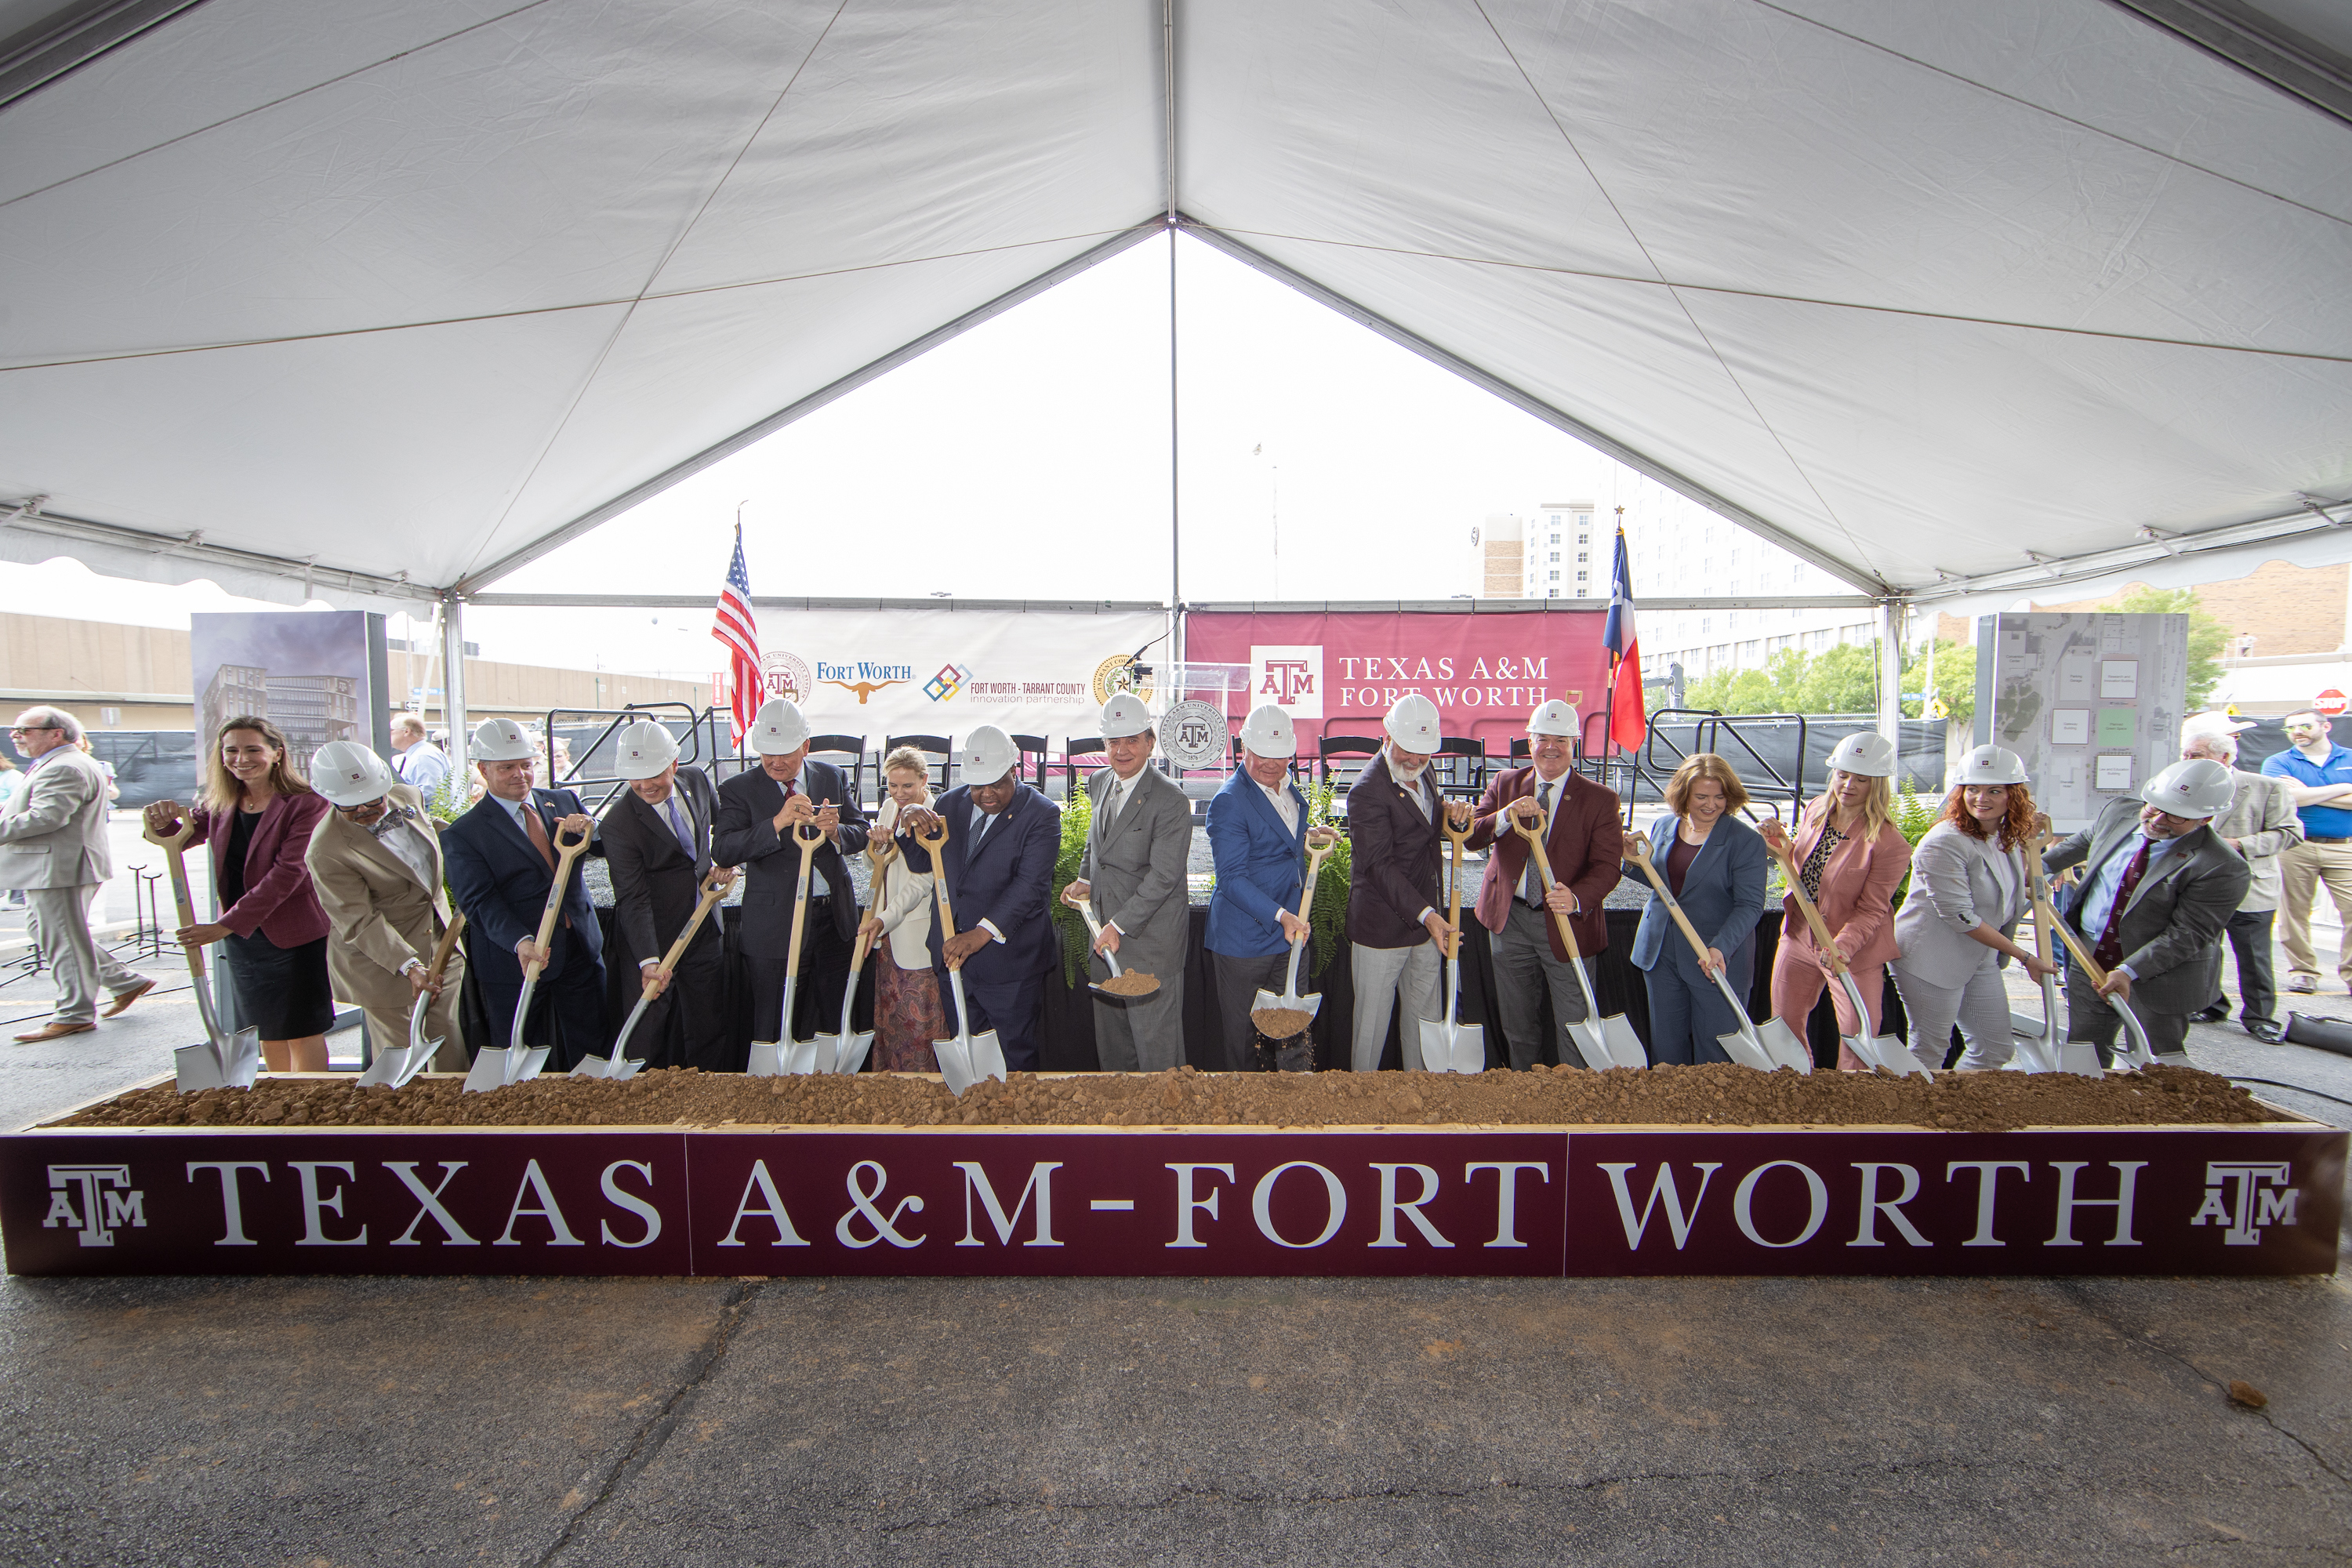 Texas A&M System Leadership wield shovels at the Texasd A&M-Fort Worth groundbreaking ceremony